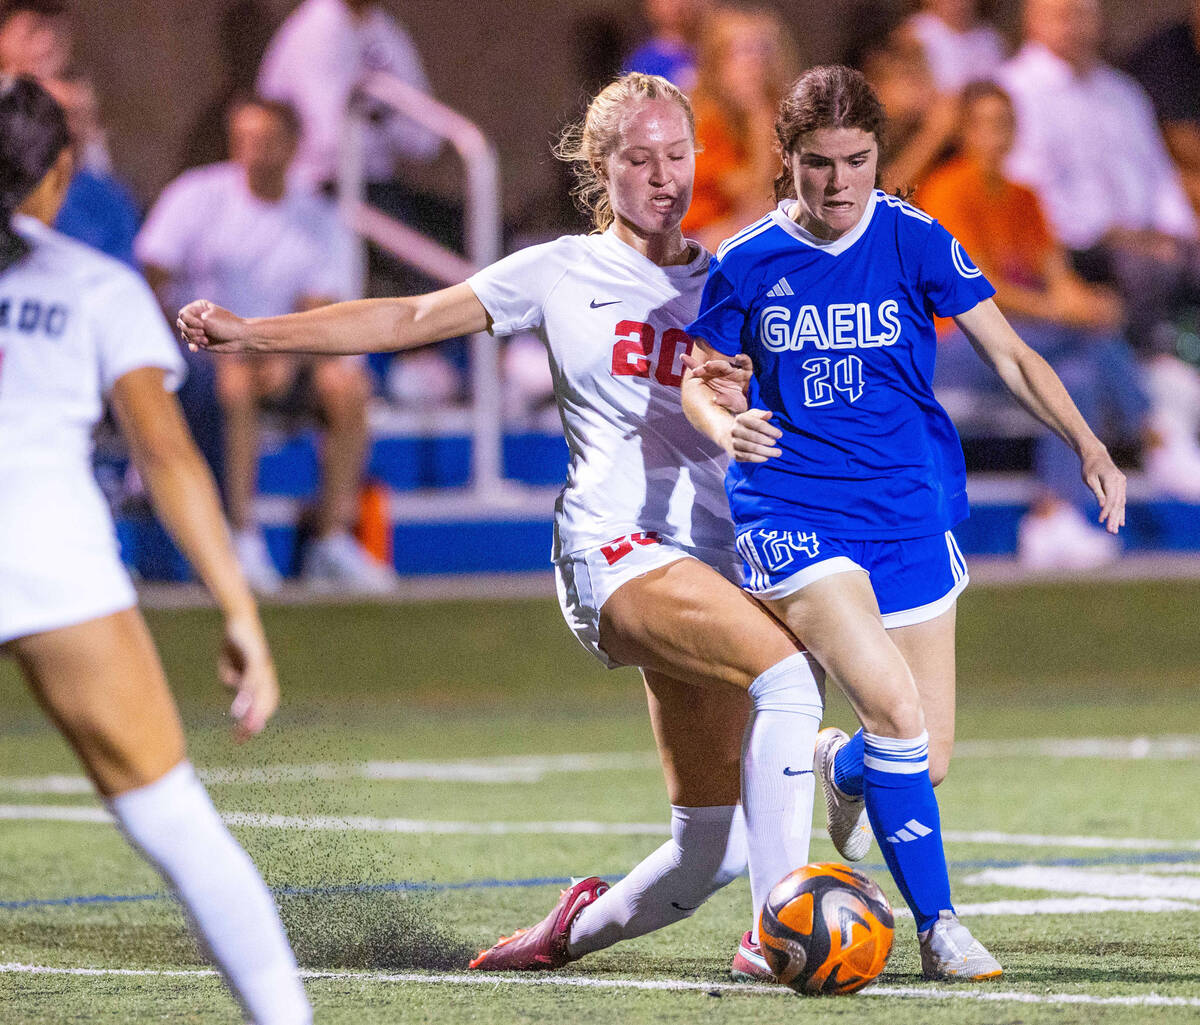 Coronado defender Cate Gusick (20) attempts to take the ball from Bishop Gorman forward Hunter ...